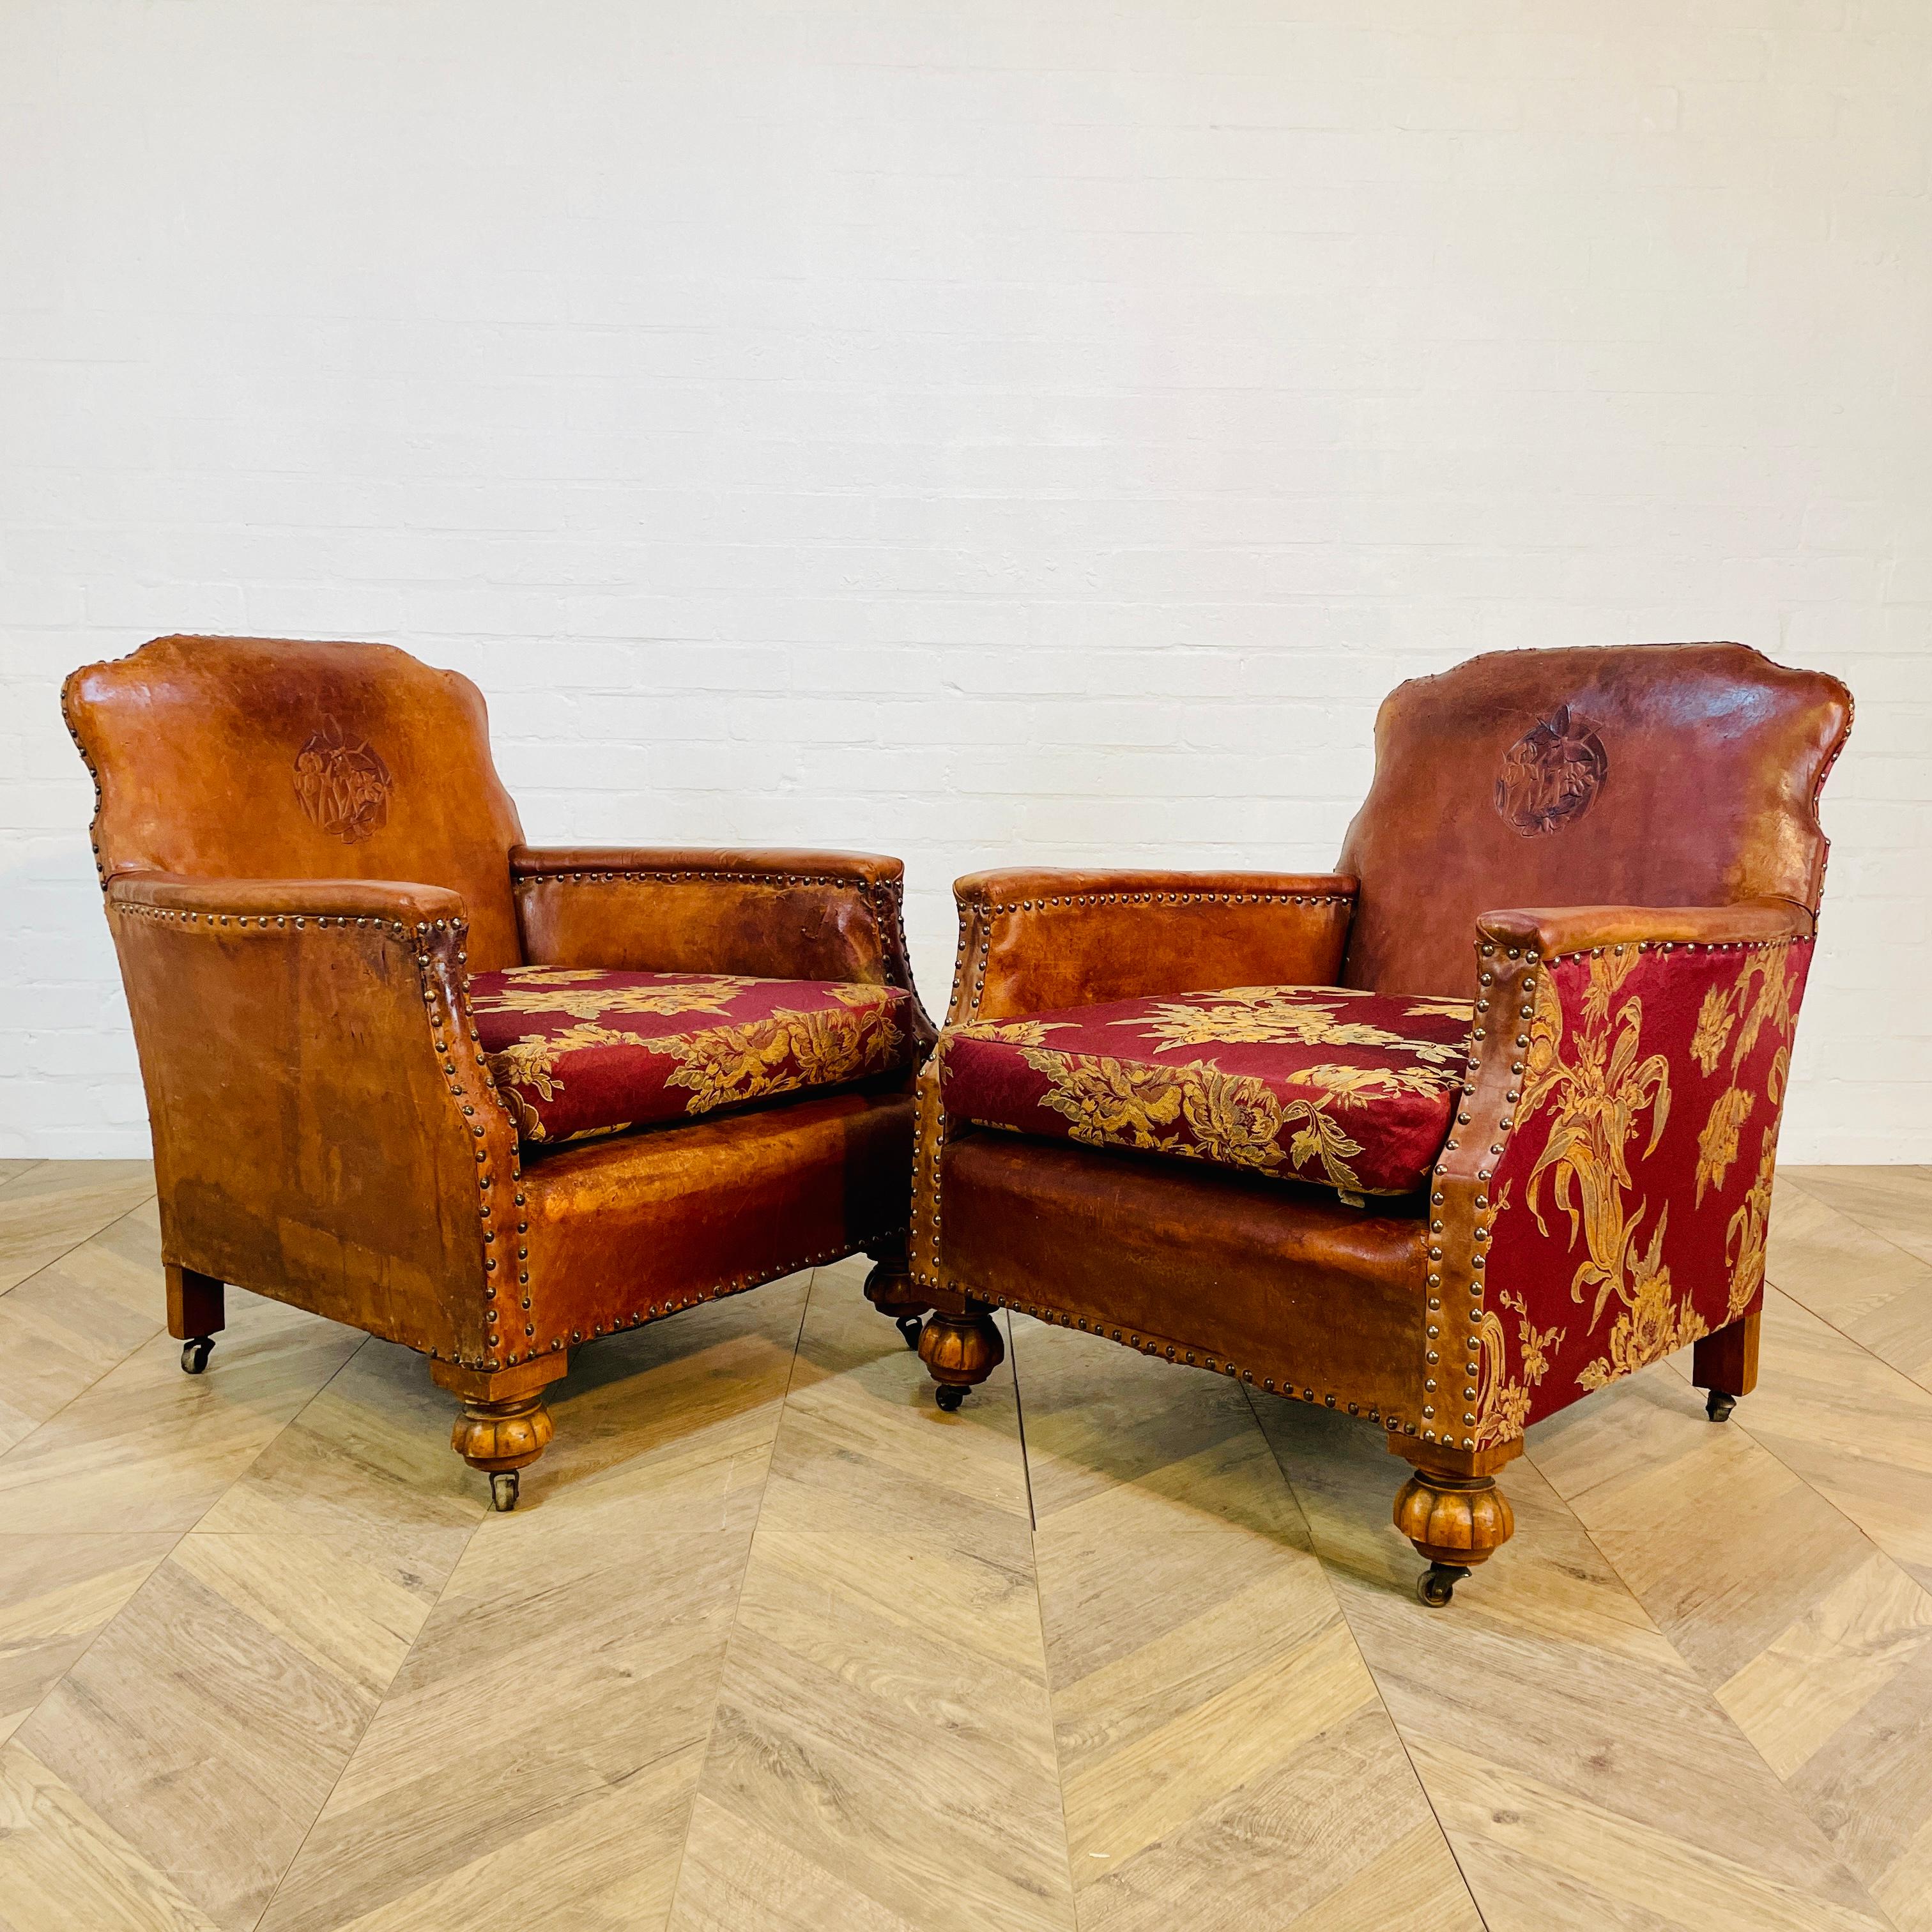 A Lovely Pair of Arts & Crafts, French Leather Club Chairs on Original Brass Castors - circa 1920s.

The chairs have wonderful proportions, shape and a lovely warm patina. 

The seat cushions and sides to one of the chairs has been professionally